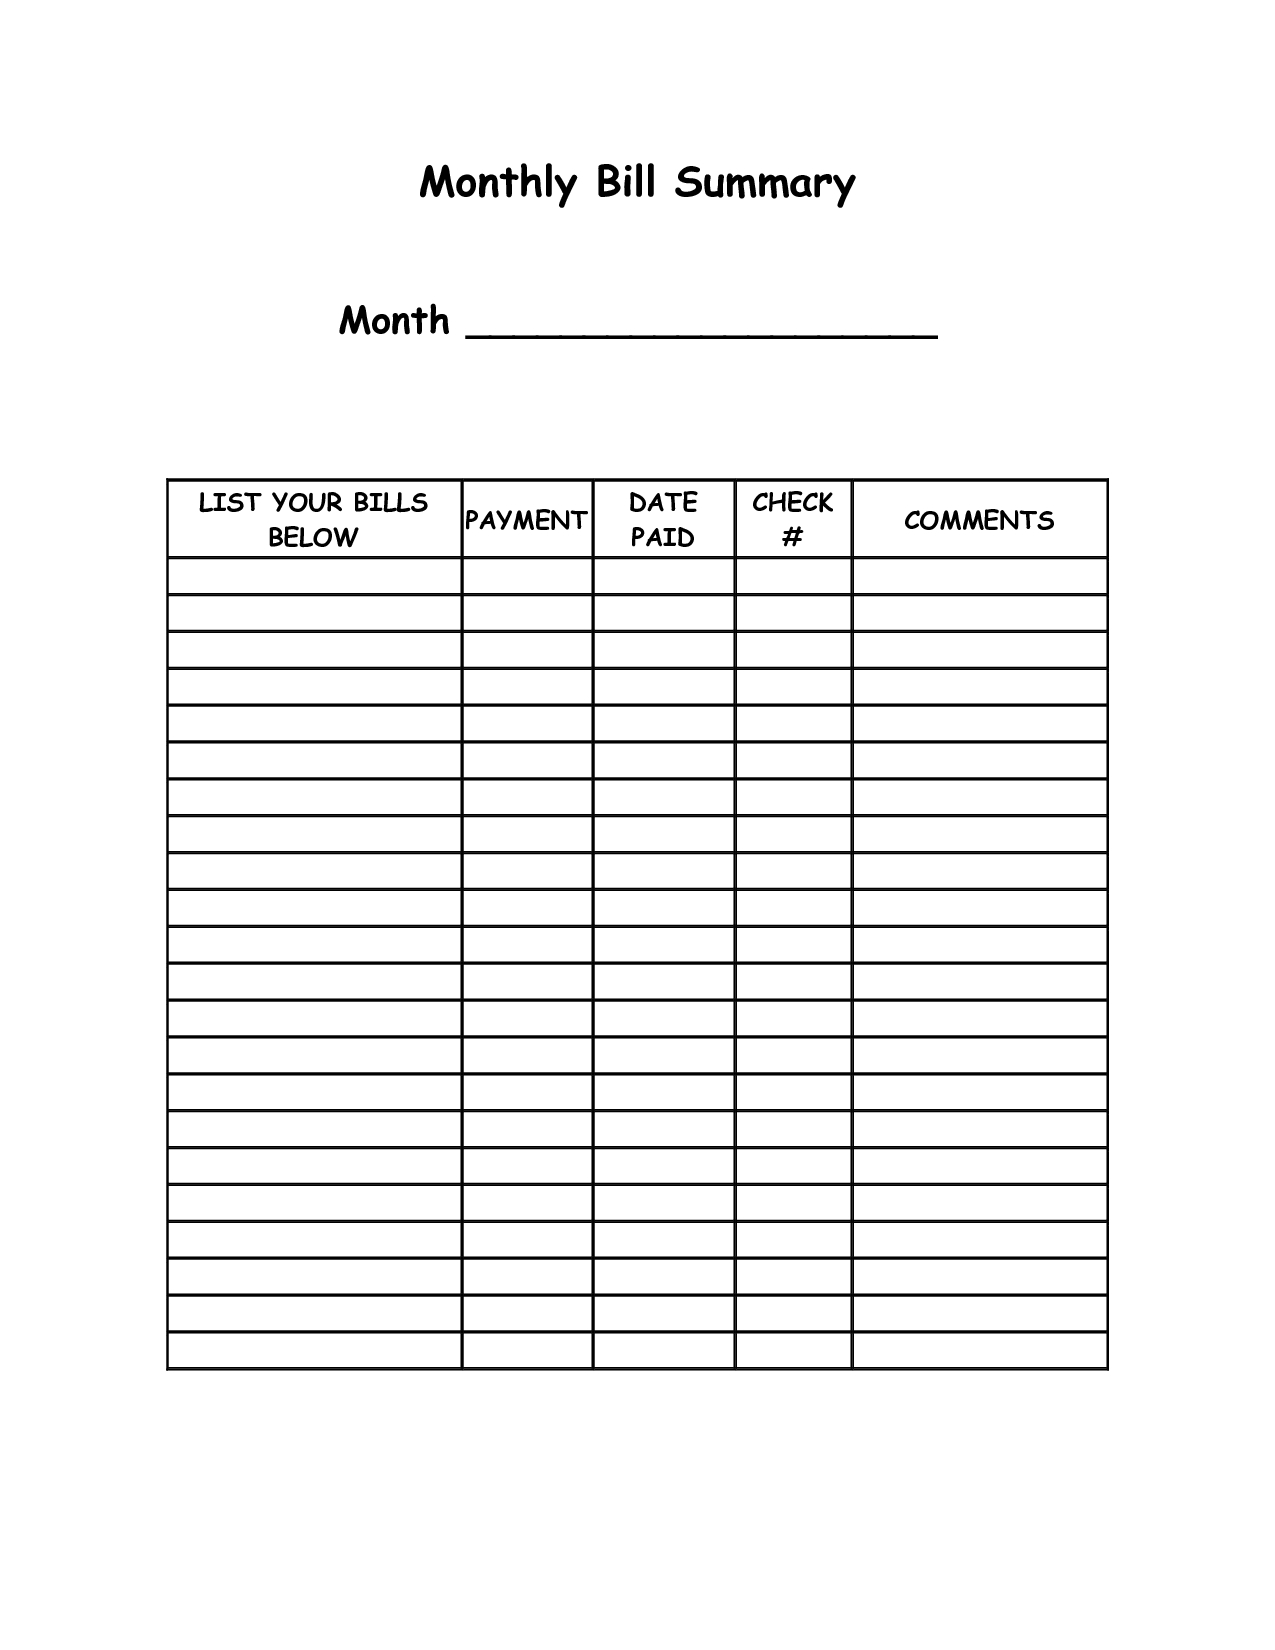 Monthly Bill Summary Doc | Organization | Organizing Monthly-Monthly Payment Calendar Schedule Worksheet